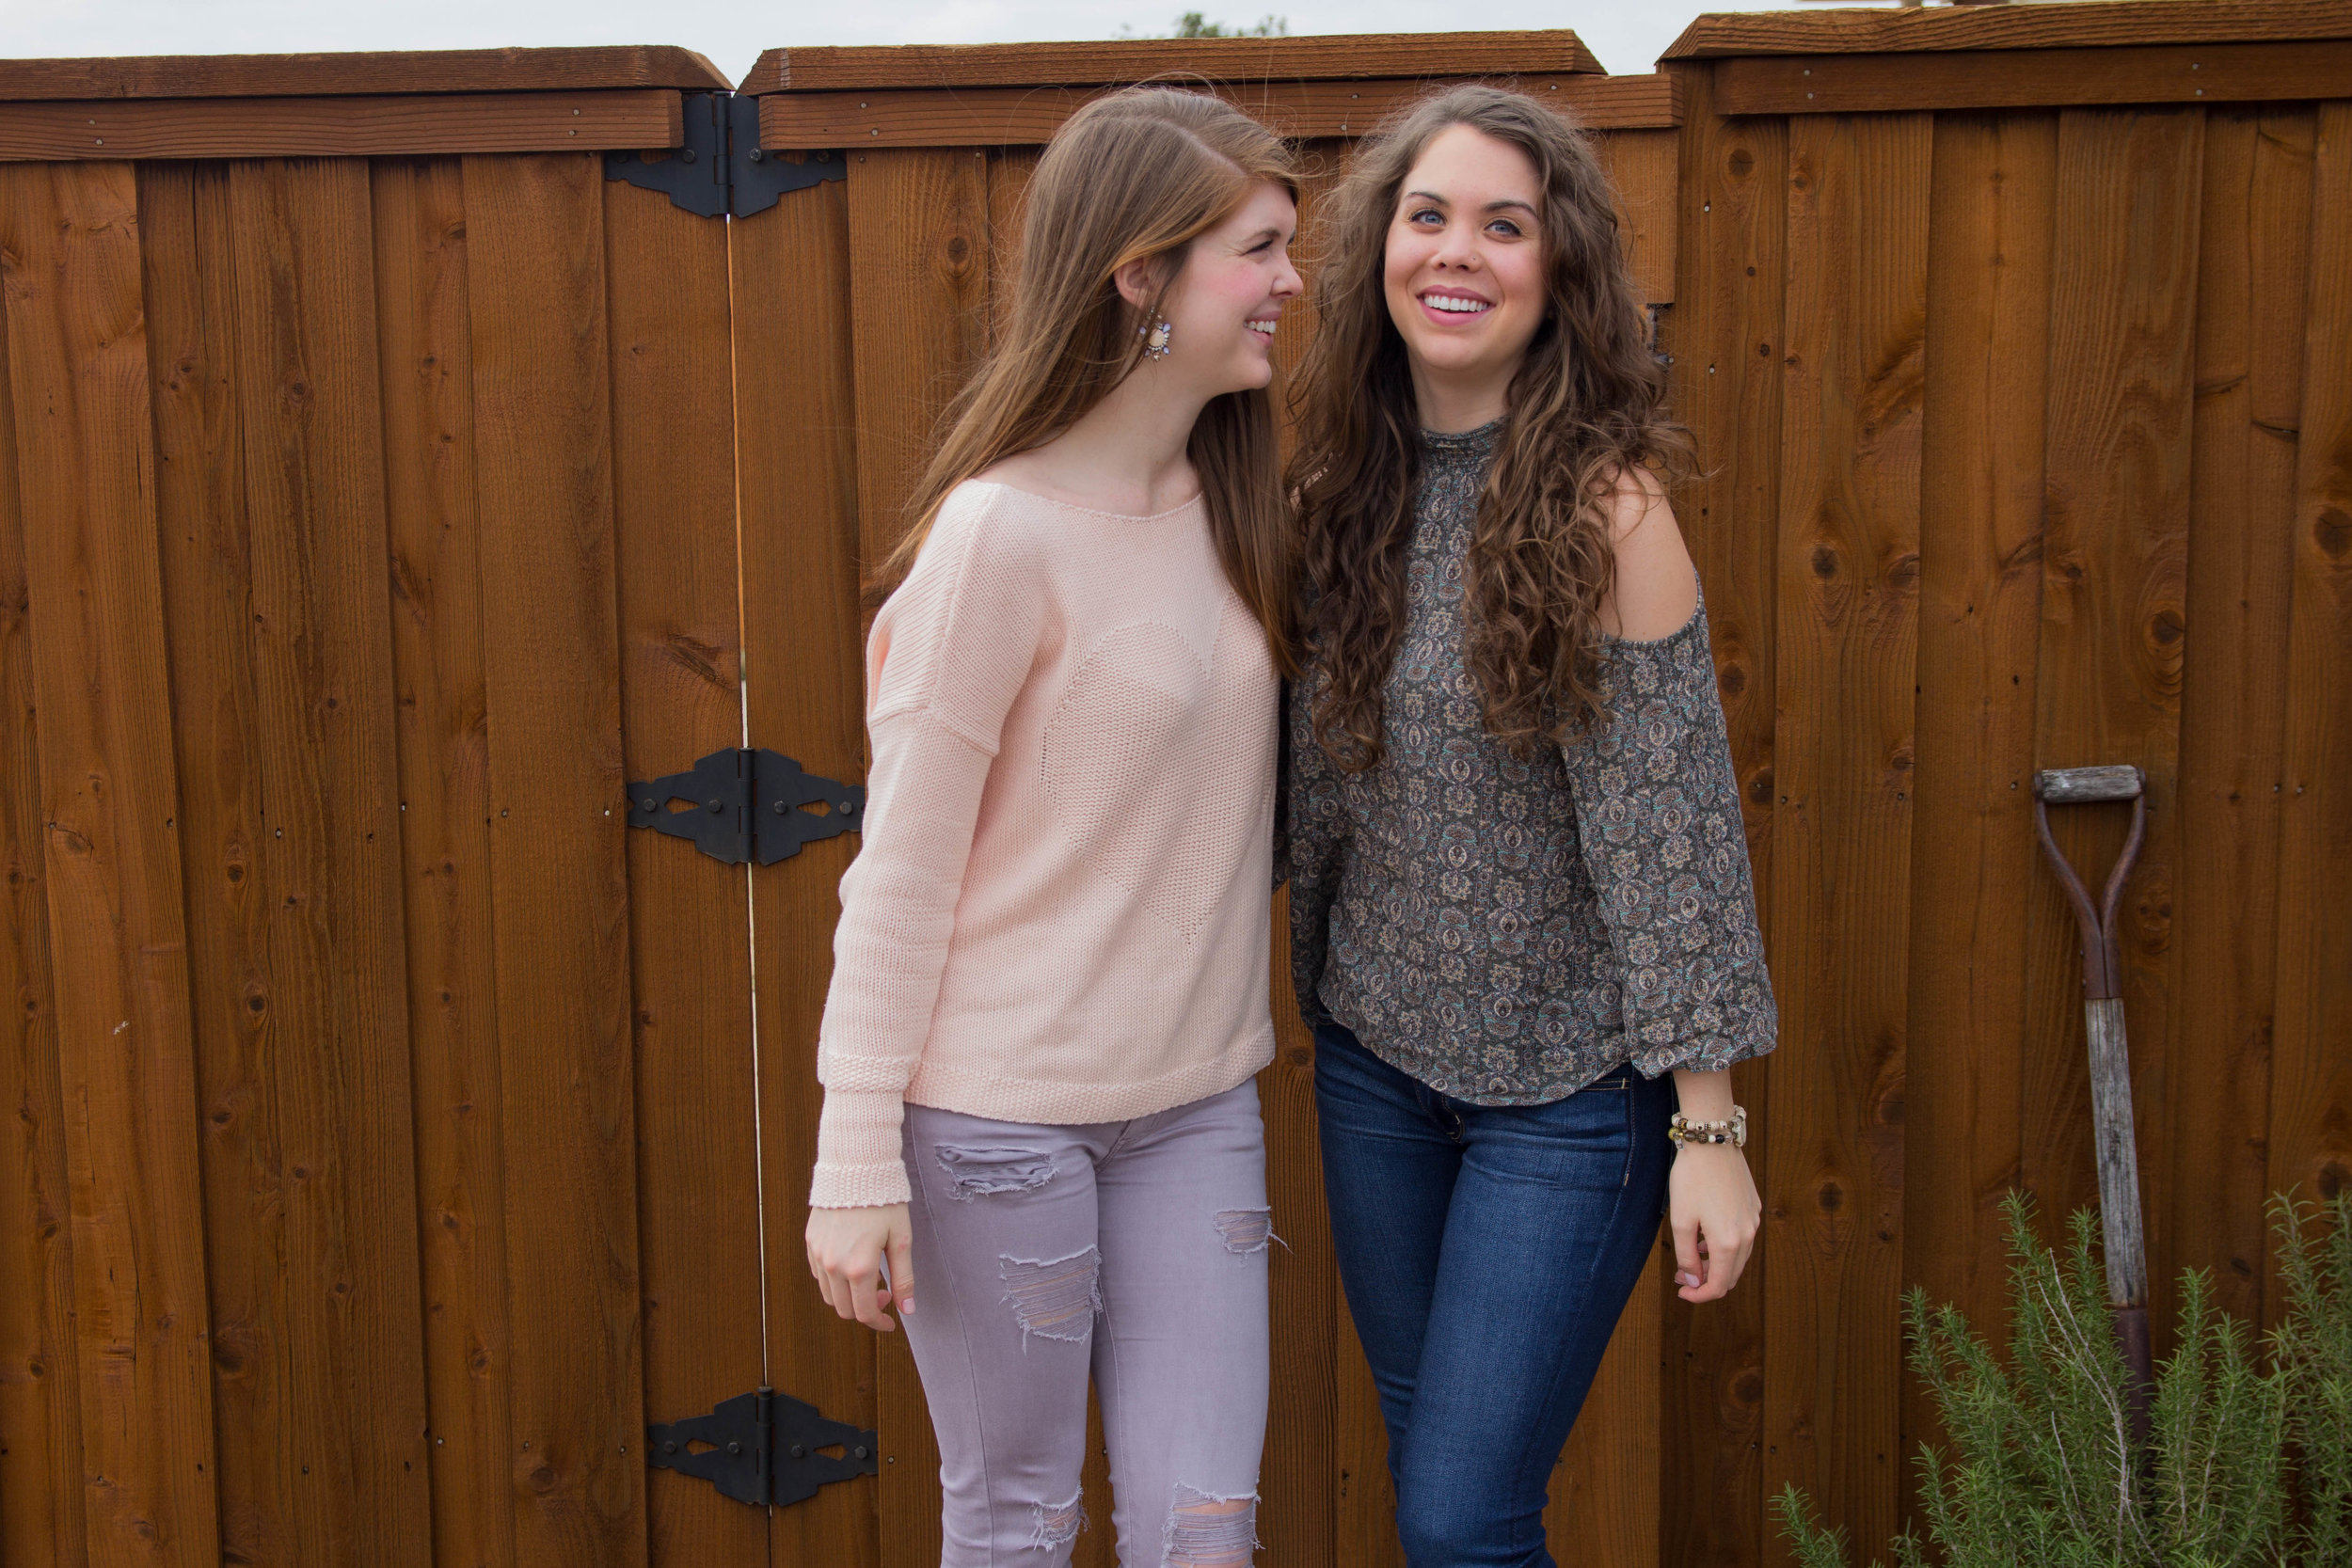 choose joy, aerie, aerie real, american eagle, christina kober designs, inspiRING, march fisher annie wedges, lavender pants, sisters, sister love, gift idea, valentine's day, valentine gift